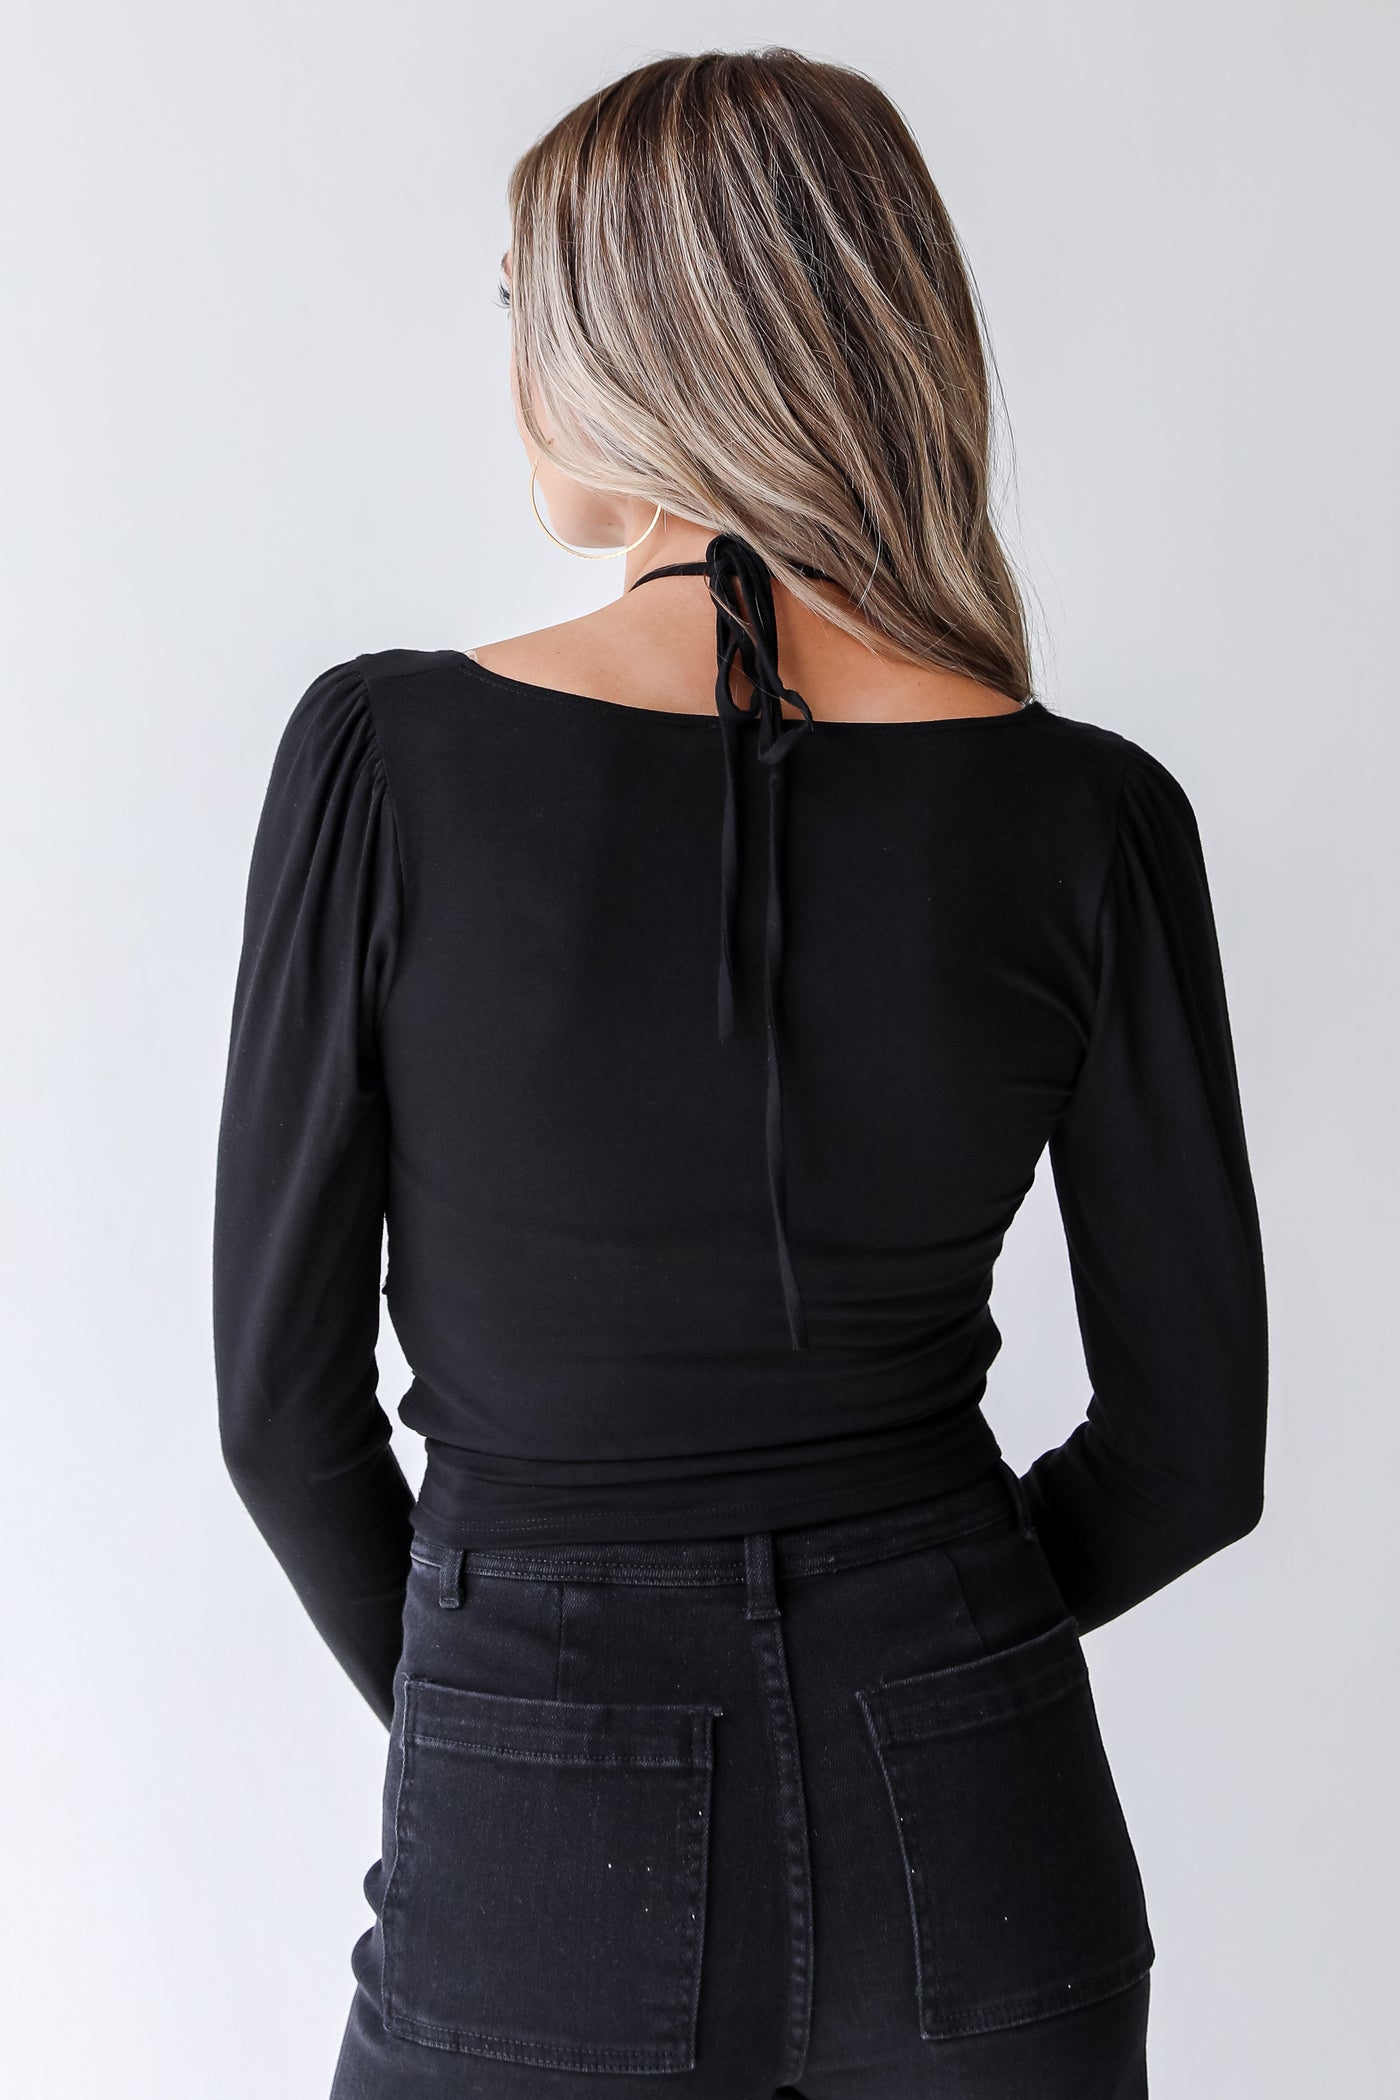 black ruched top back view